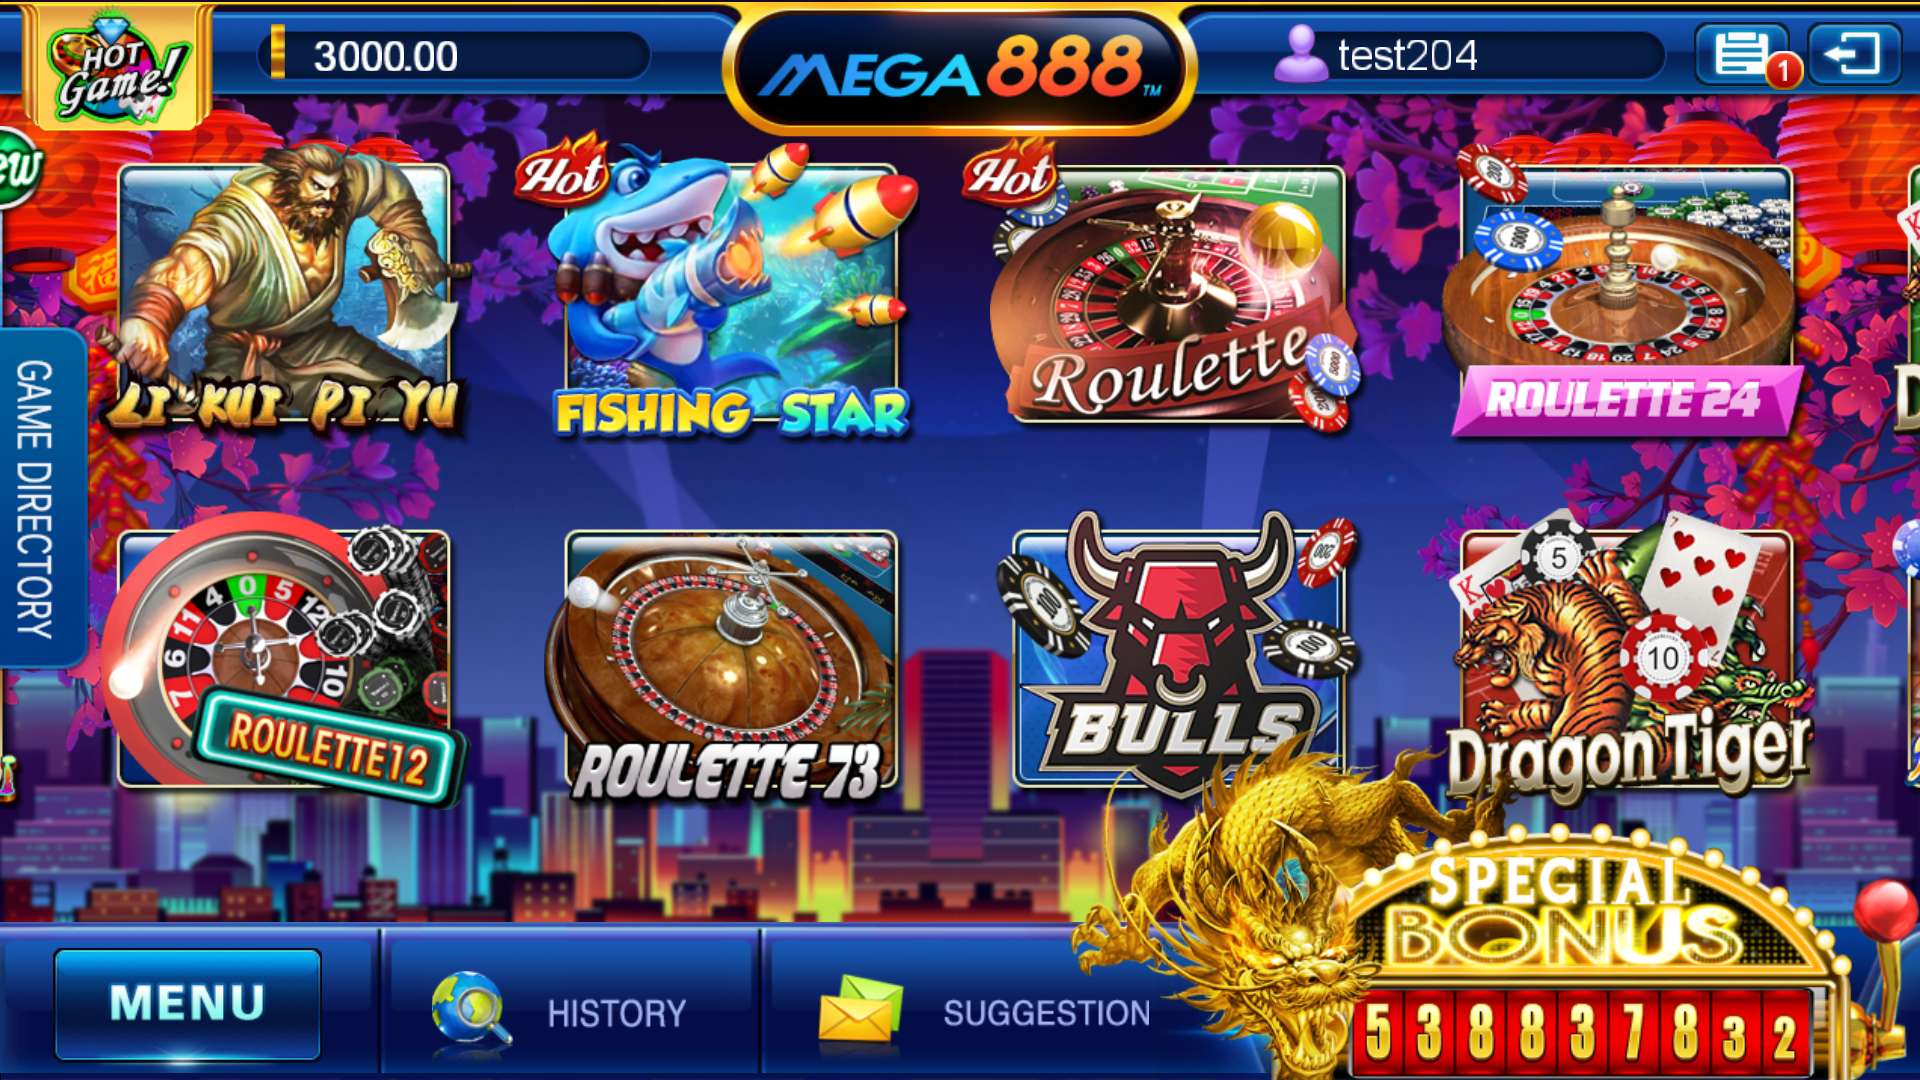 Common Mistakes Mega888 Slots Players Make In me88